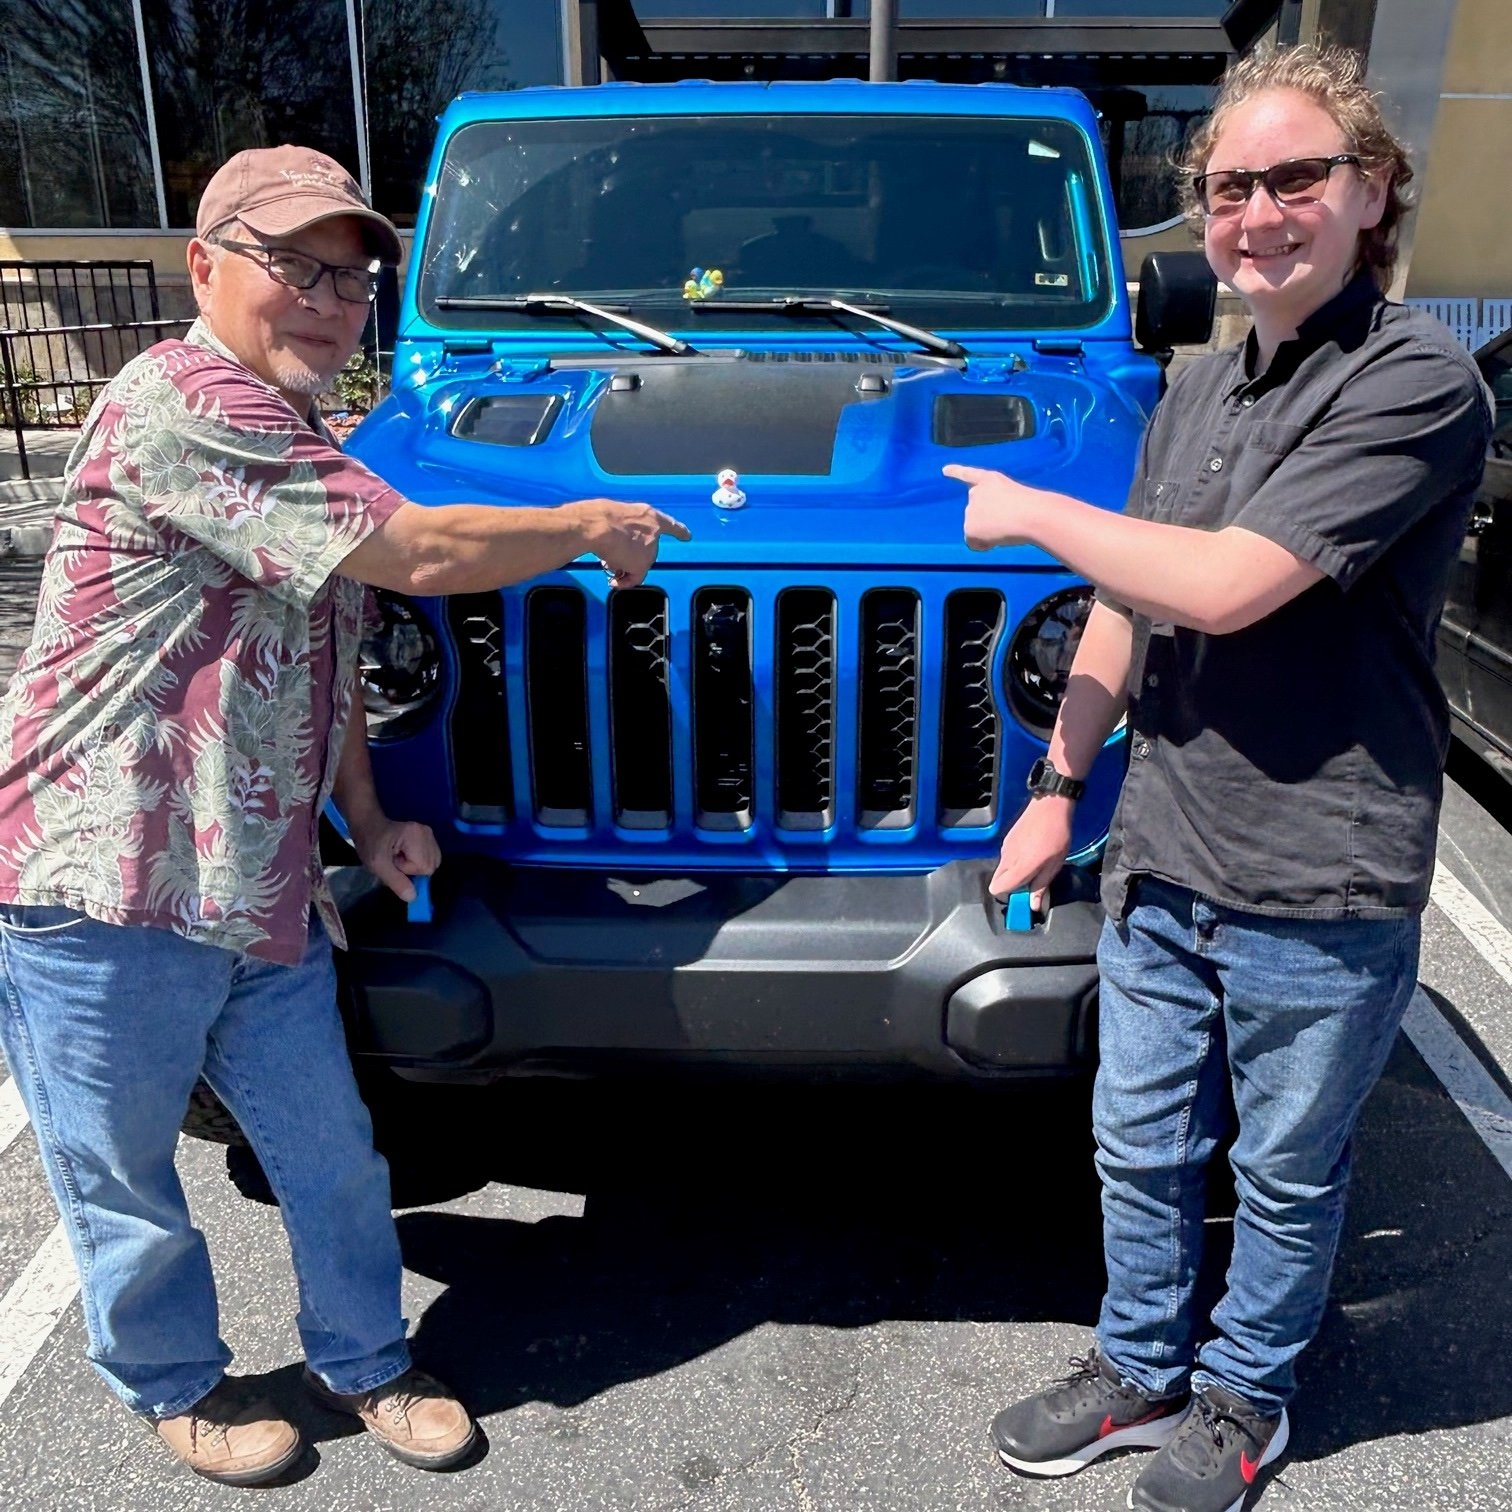 Best Photo Wins!
All through April, Richie&rsquo;s Diner Rancho Cucamonga is playing Duck! Duck! Jeep, both near and far!  Whether you are in the neighborhood or are on a Jeep Jamboree, tag us on social media when you post your Jeep/Duckie photos! Yo